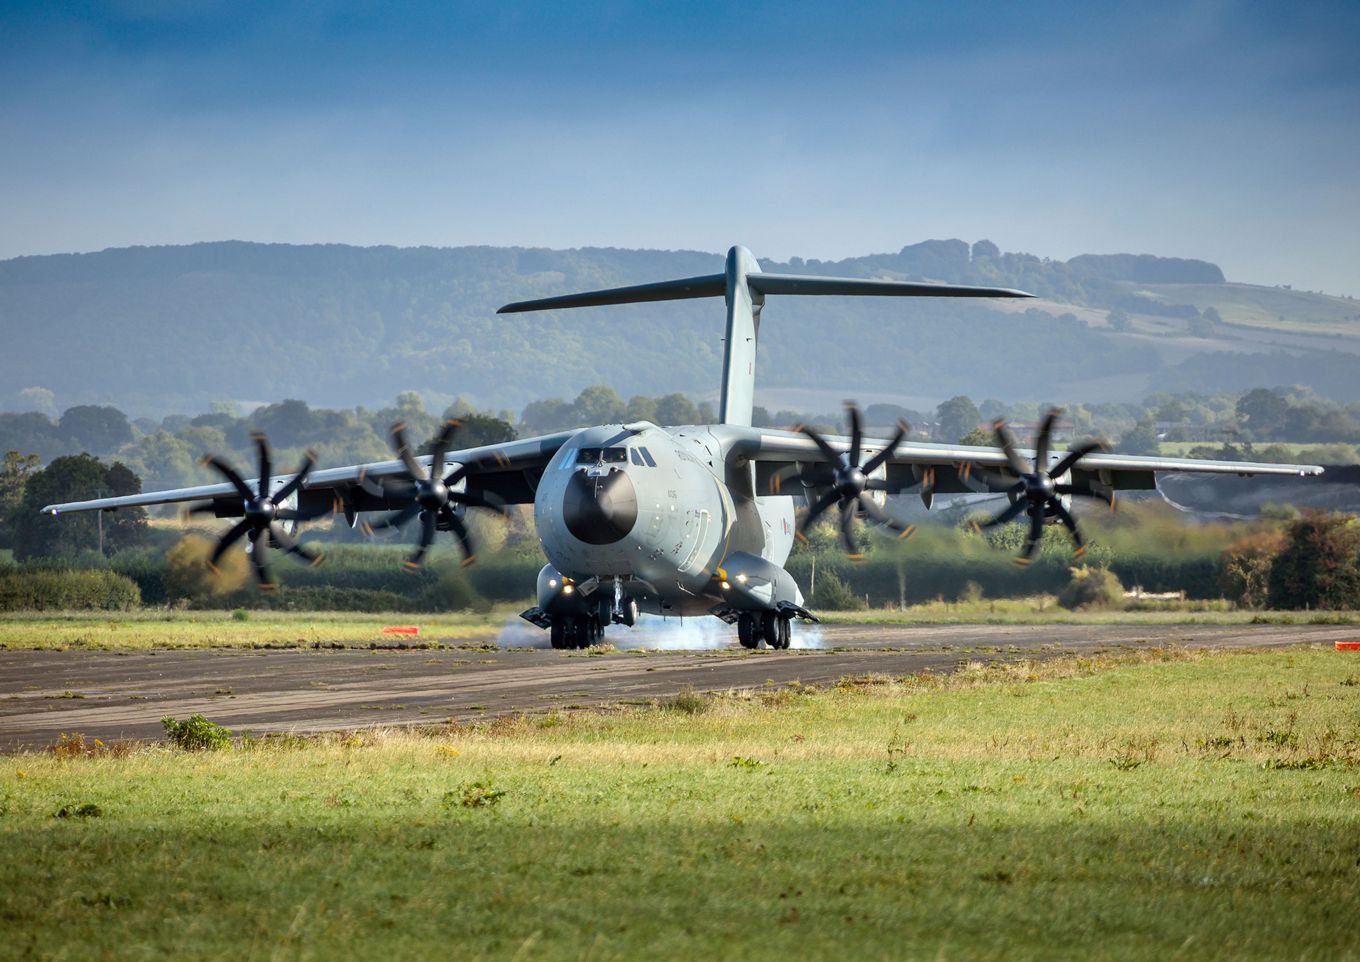 An A400M Atlas arrives at Keevil airfield, Wiltshire. 